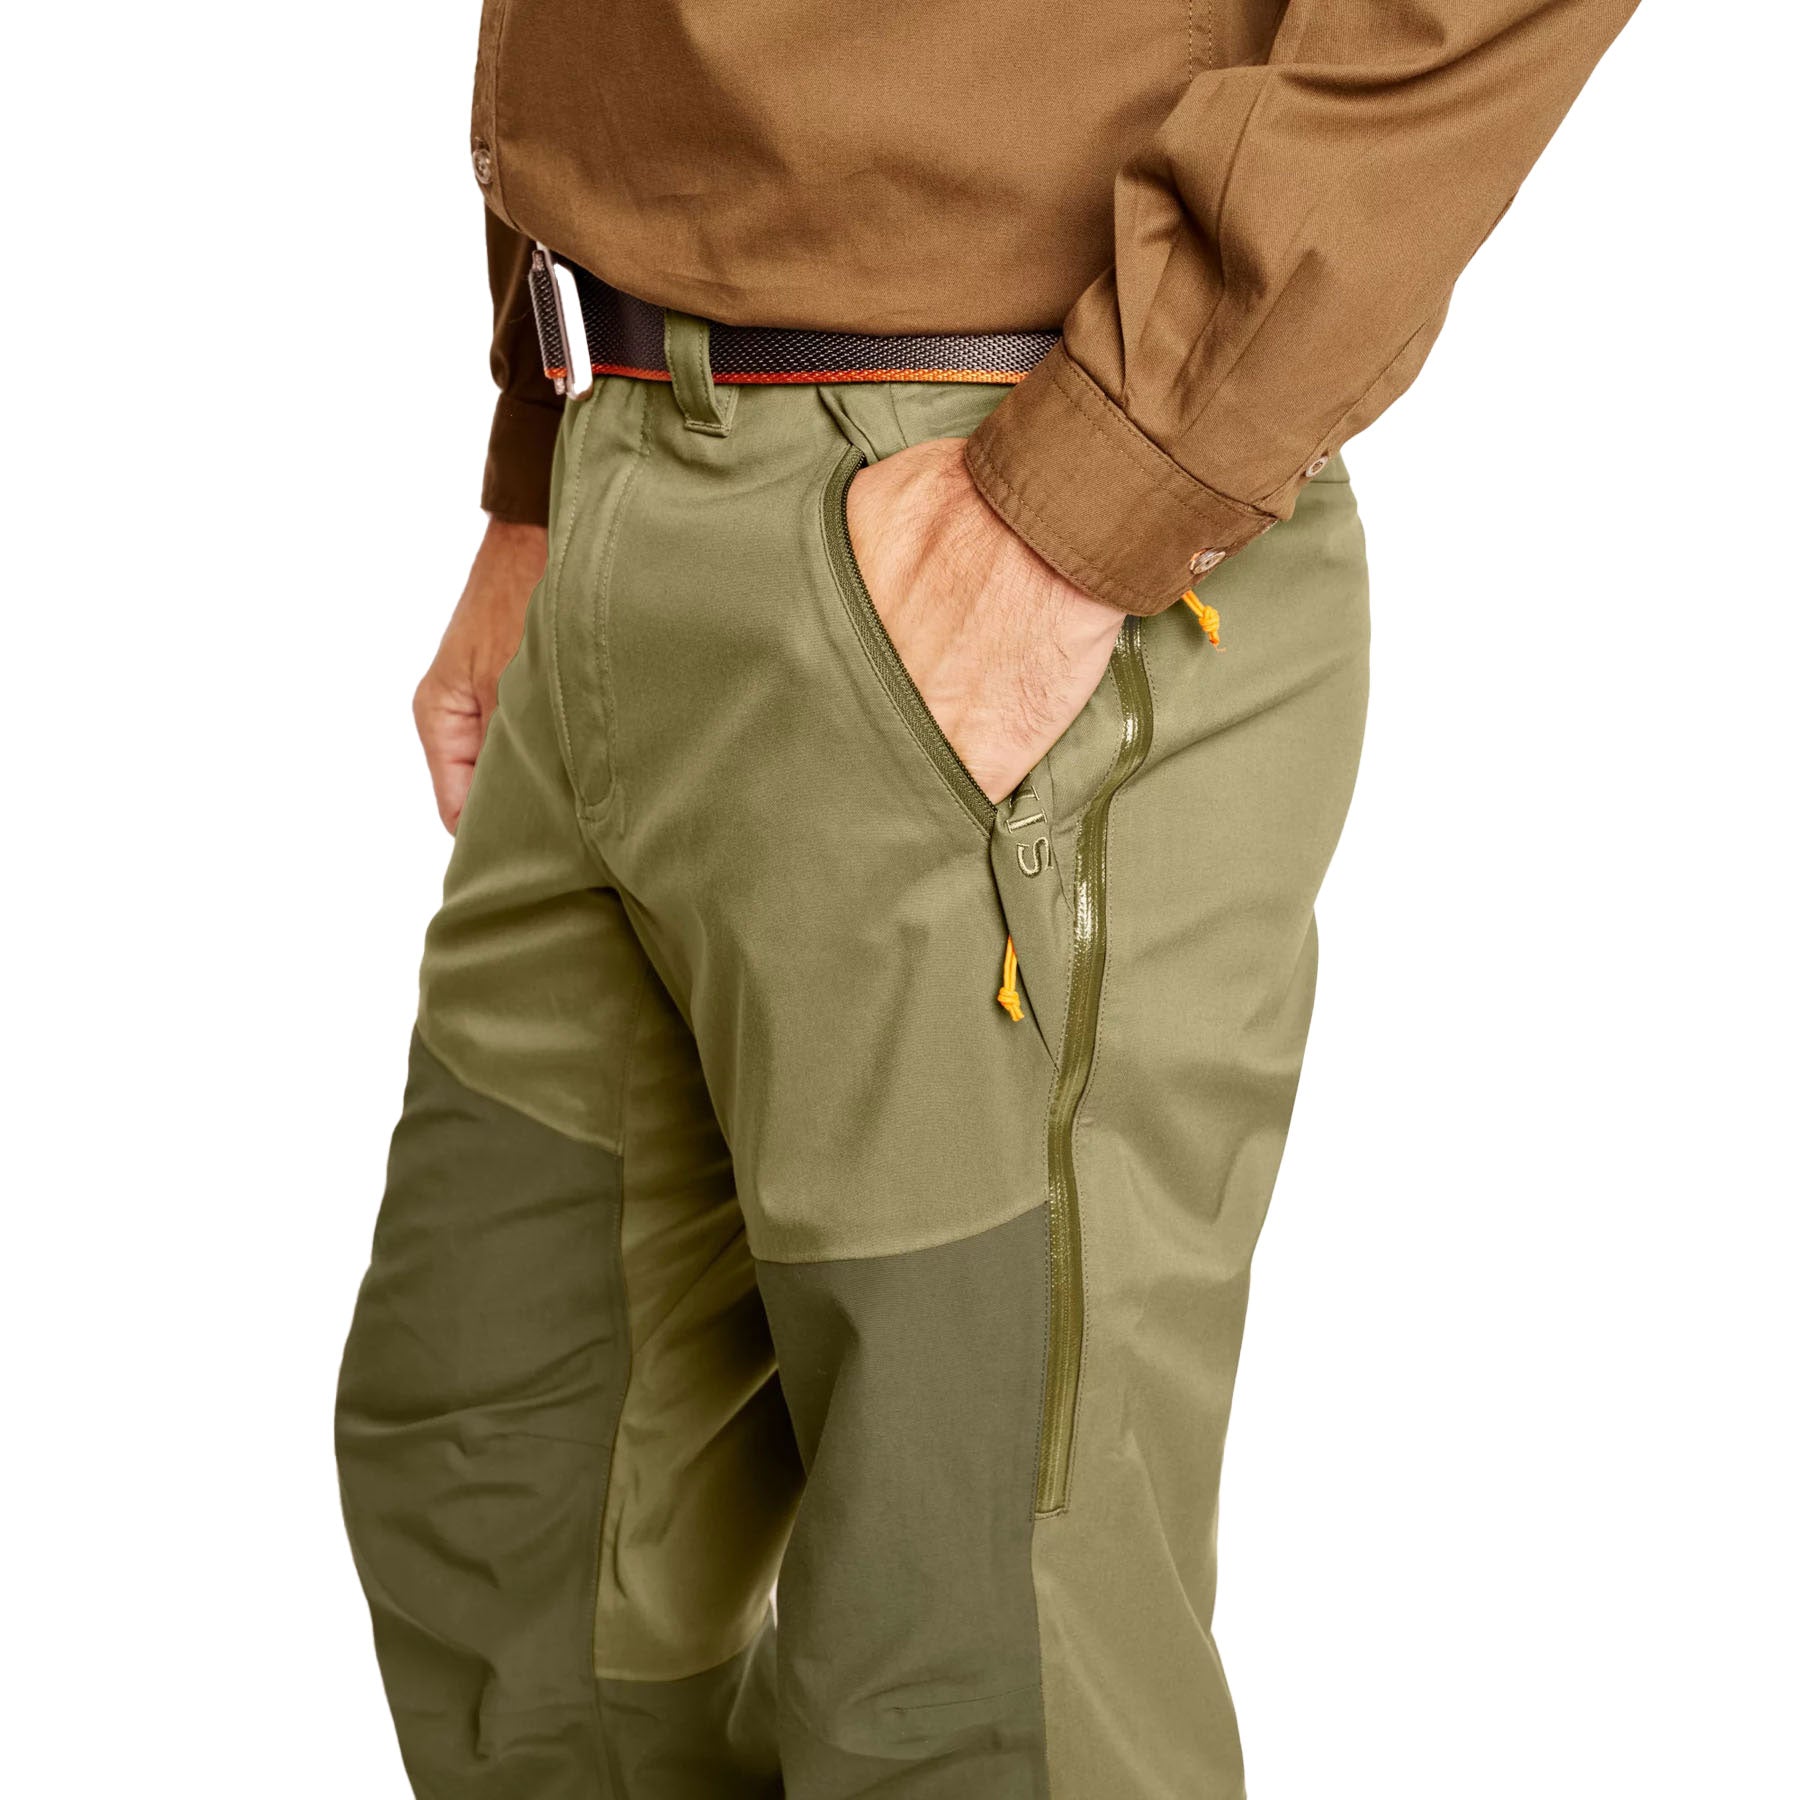 Orvis Pro Toughshell Pant - Fin & Fire Fly Shop